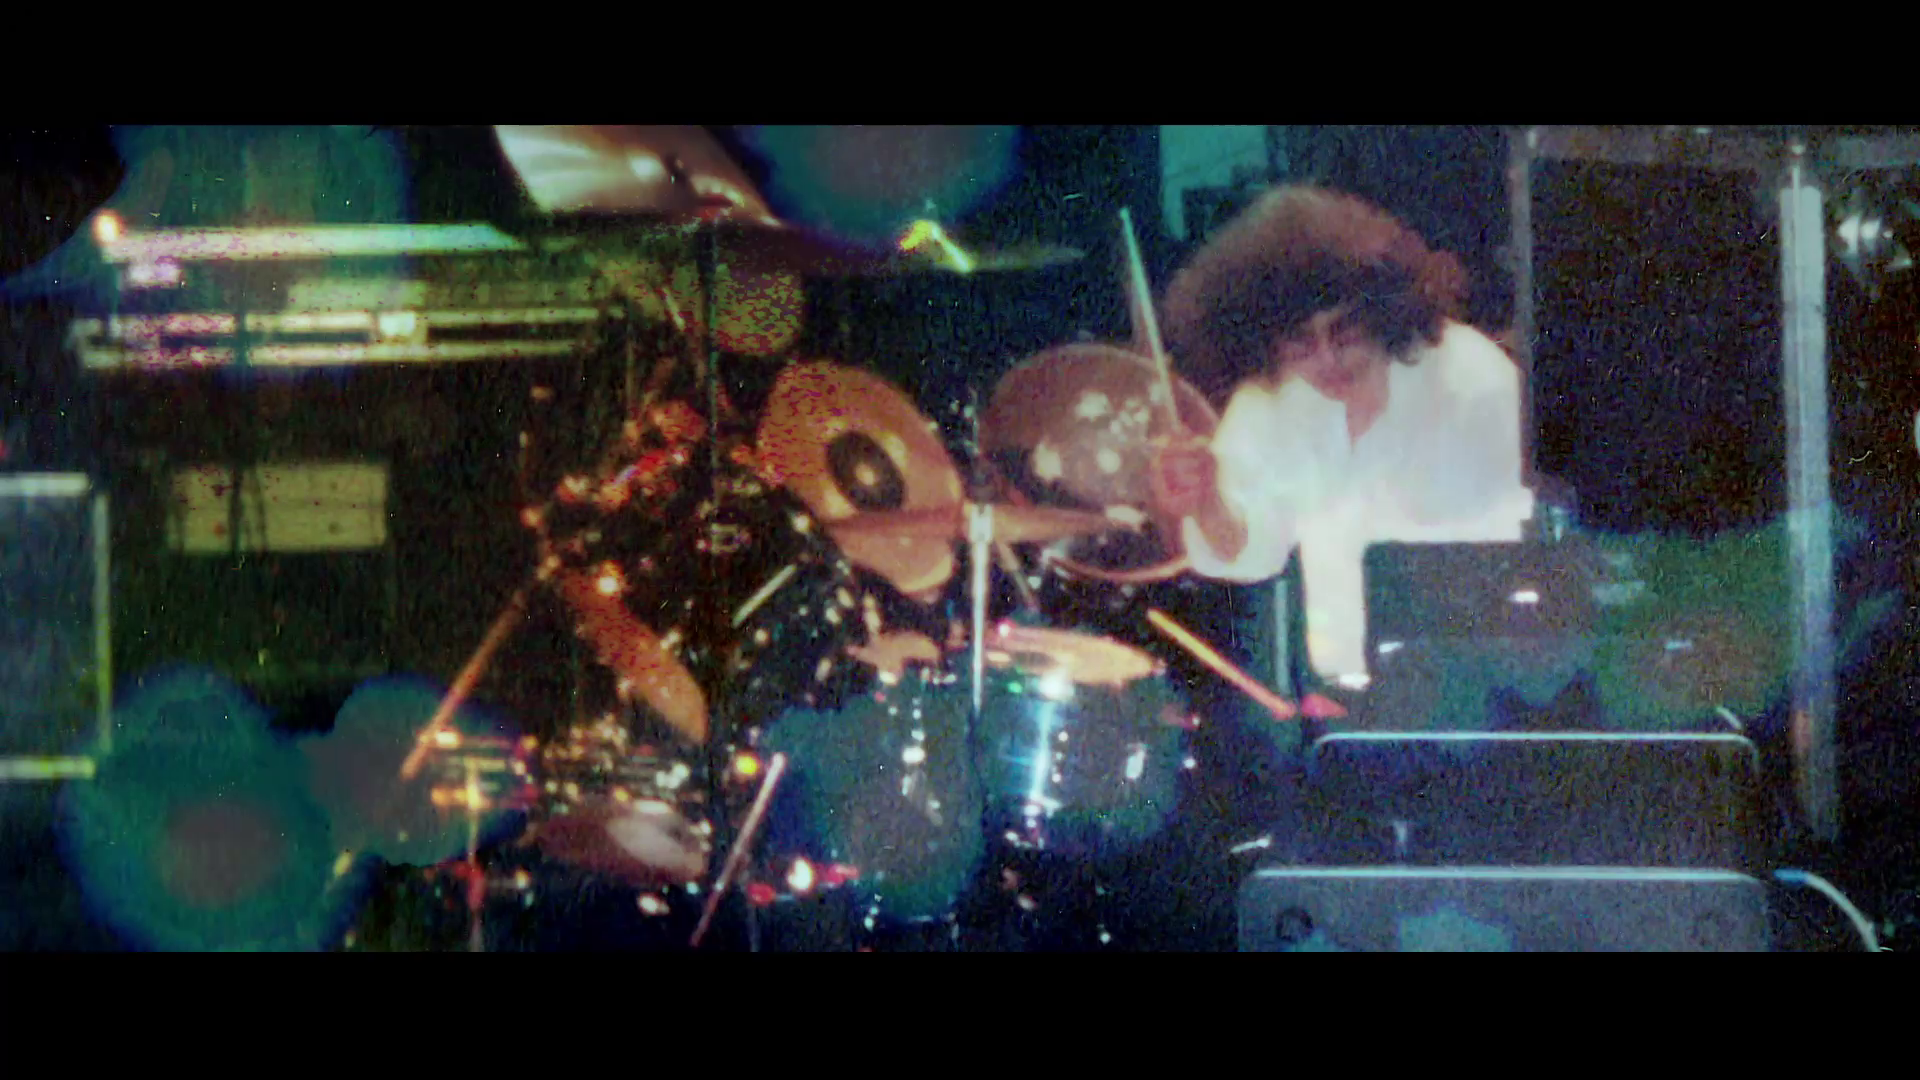 A grungy image of Dave Hickman playing the drums